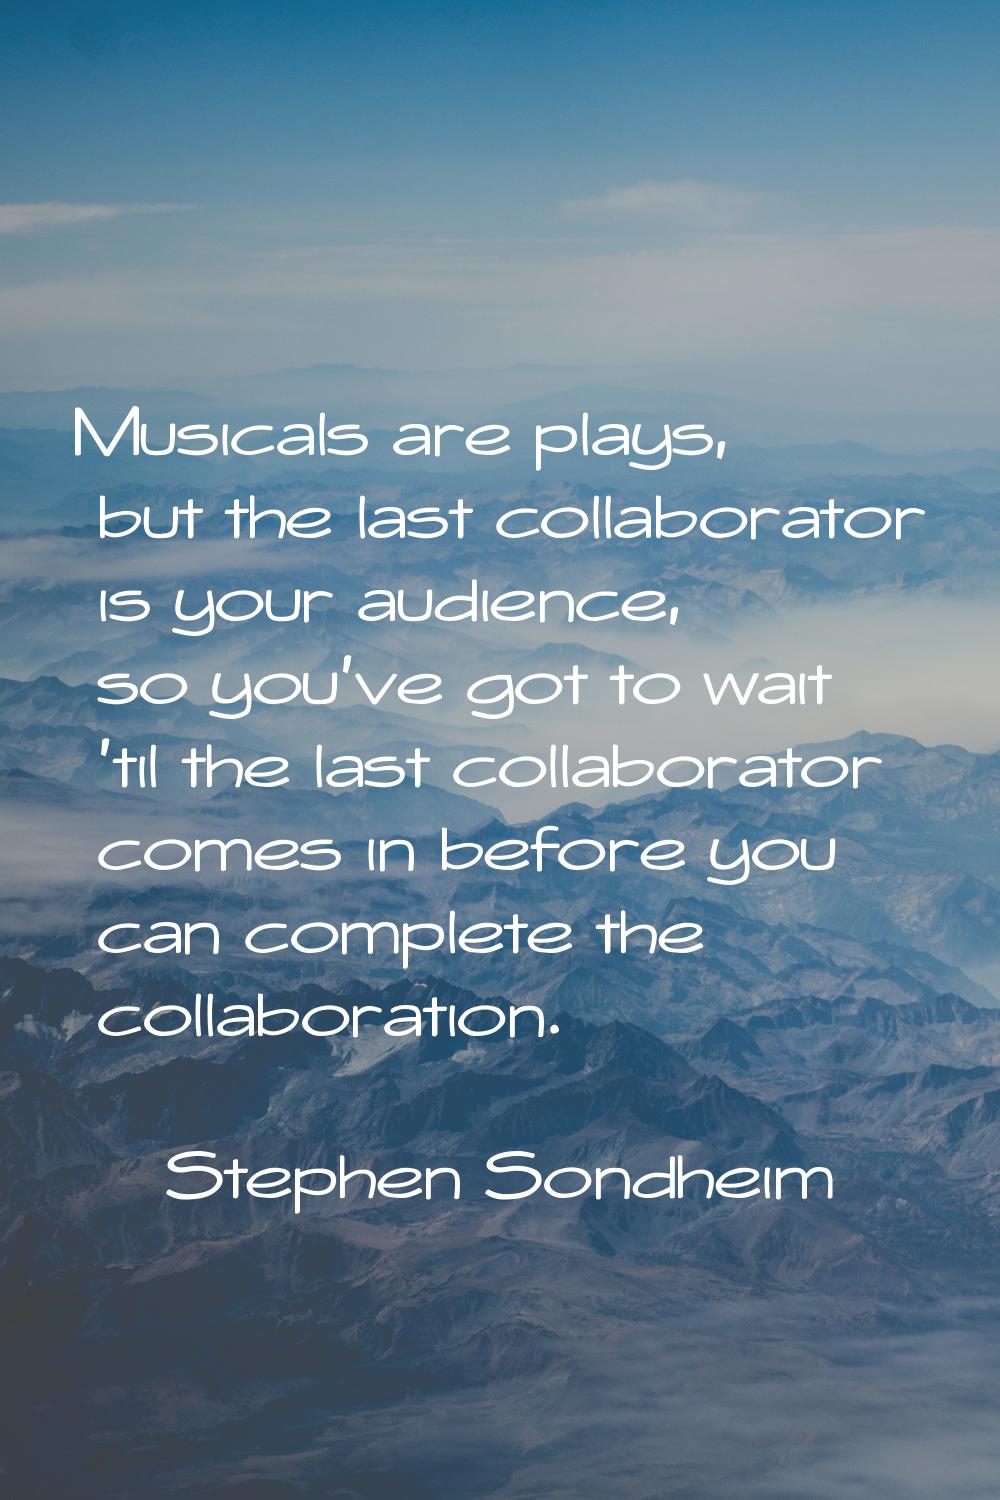 Musicals are plays, but the last collaborator is your audience, so you've got to wait 'til the last